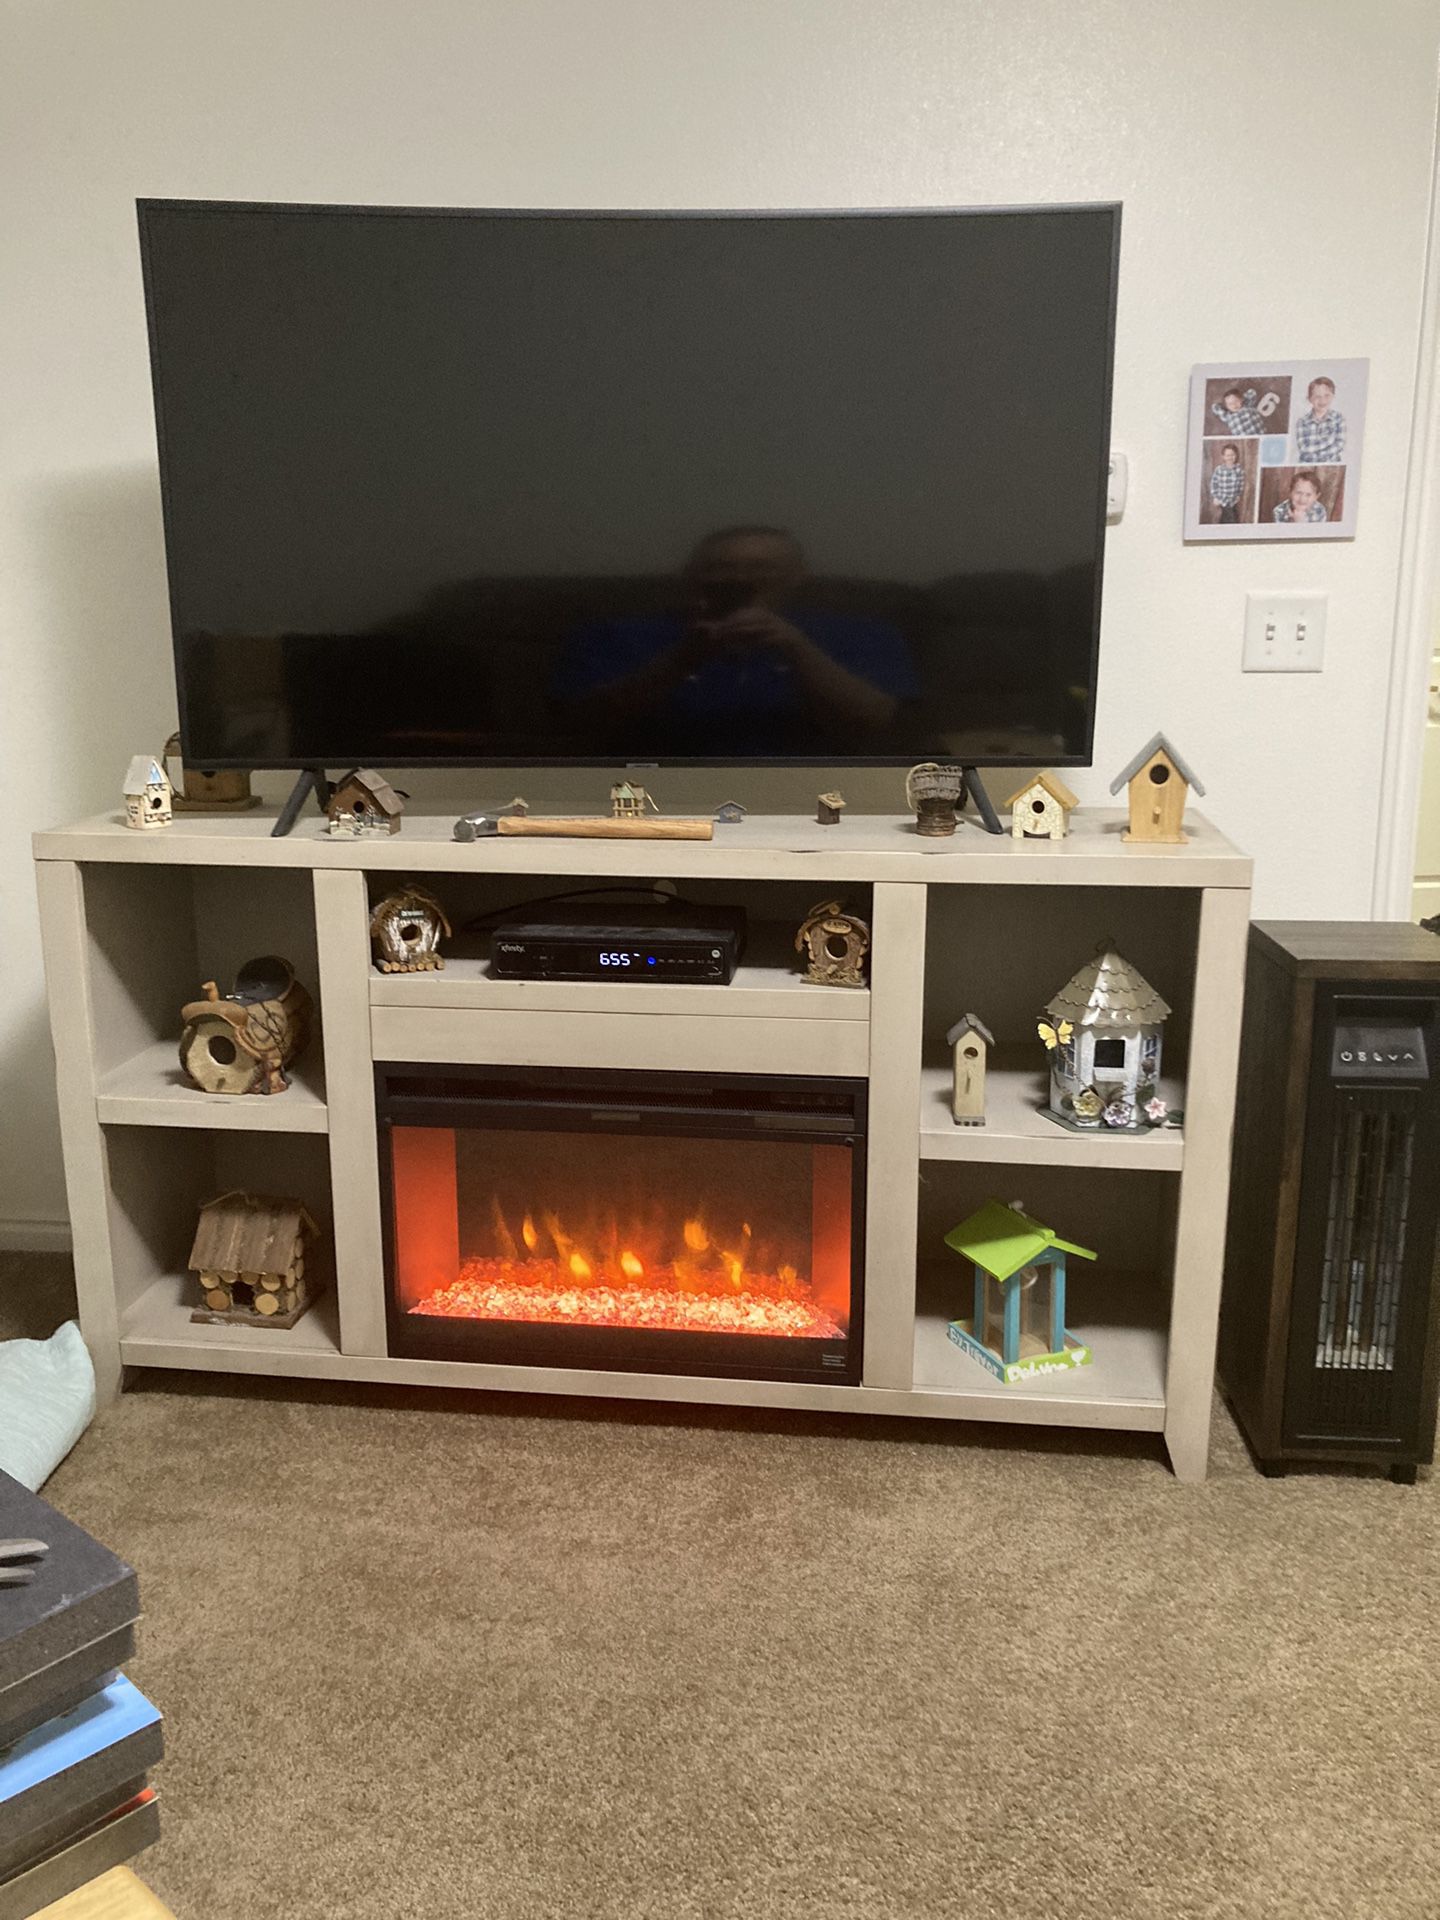 Fire Place Stand 